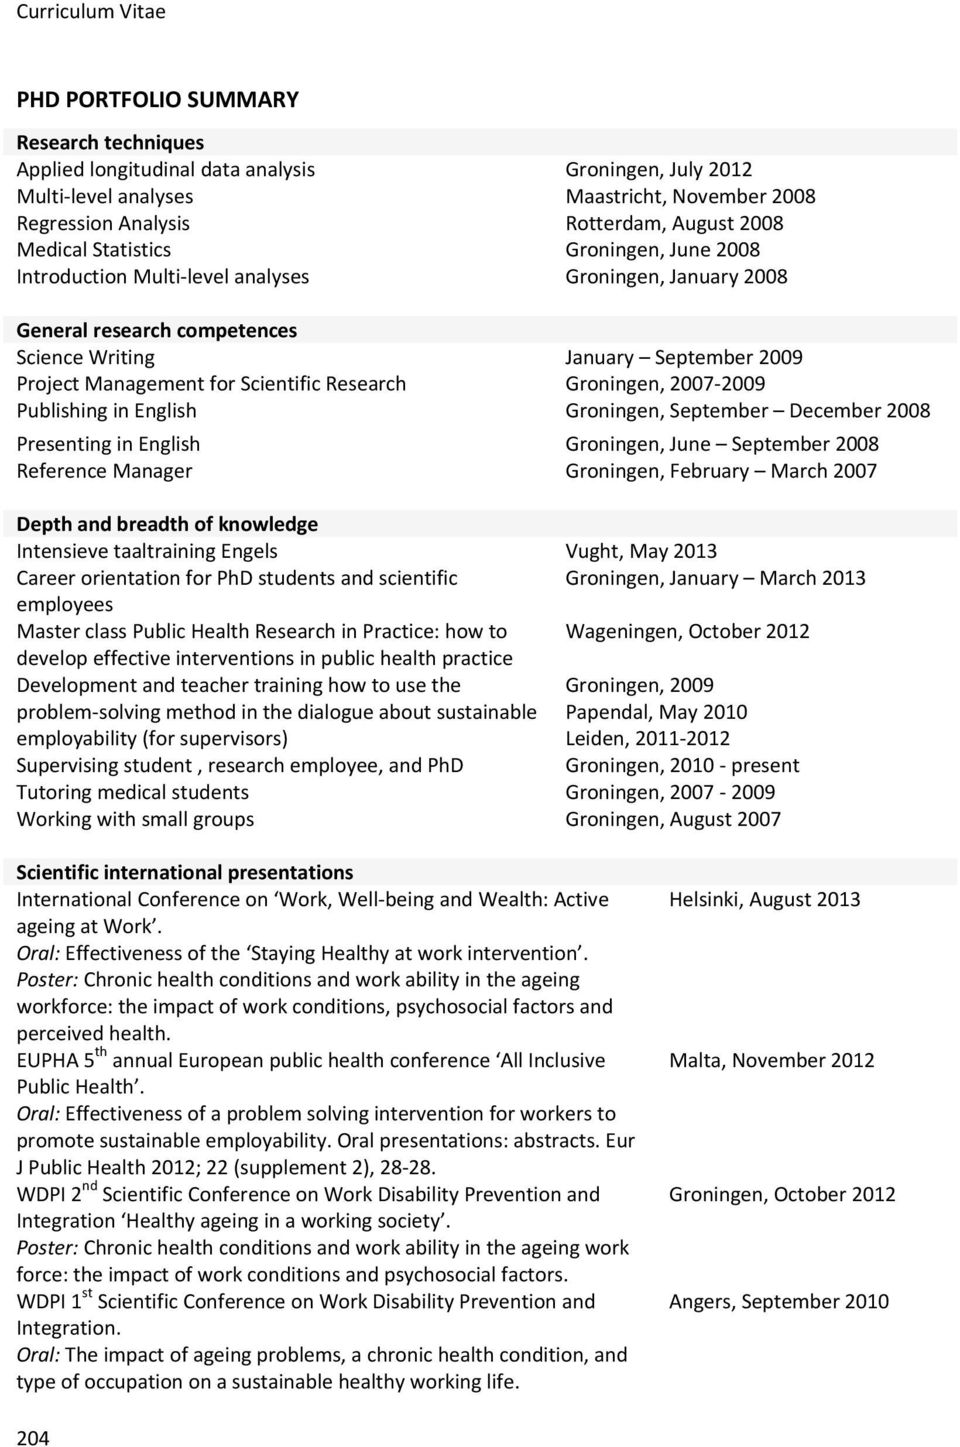 Research Groningen, 2007 2009 Publishing in English Groningen, September December 2008 Presenting in English Groningen, June September 2008 Reference Manager Groningen, February March 2007 Depth and